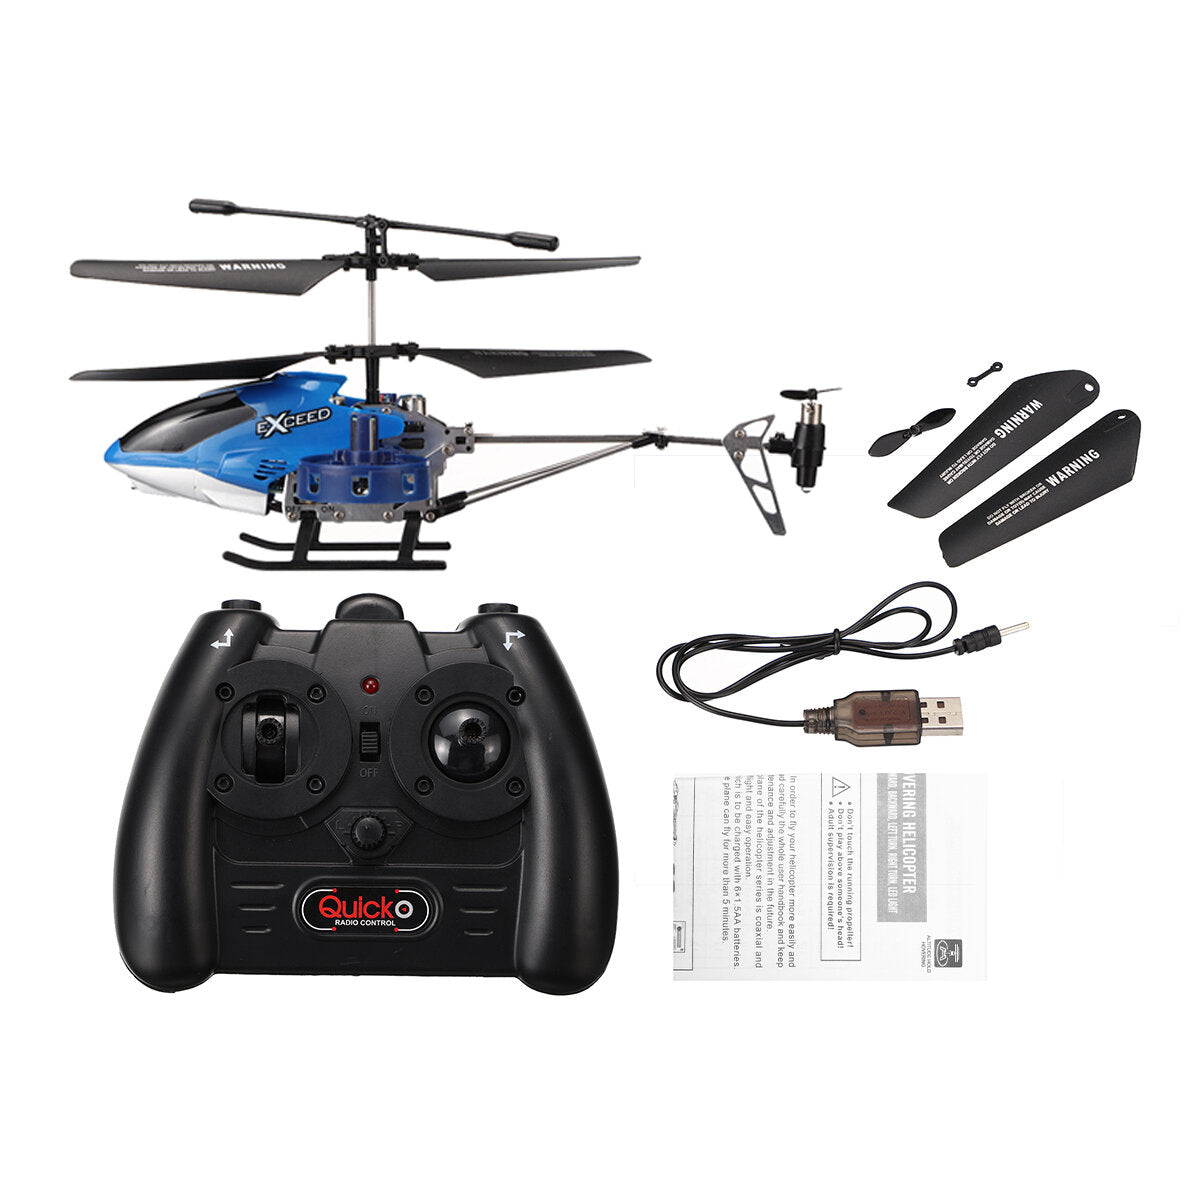 2.4G 4CH Altitude Hold RC Helicopter RTF Alloy Electric RC Model Toys